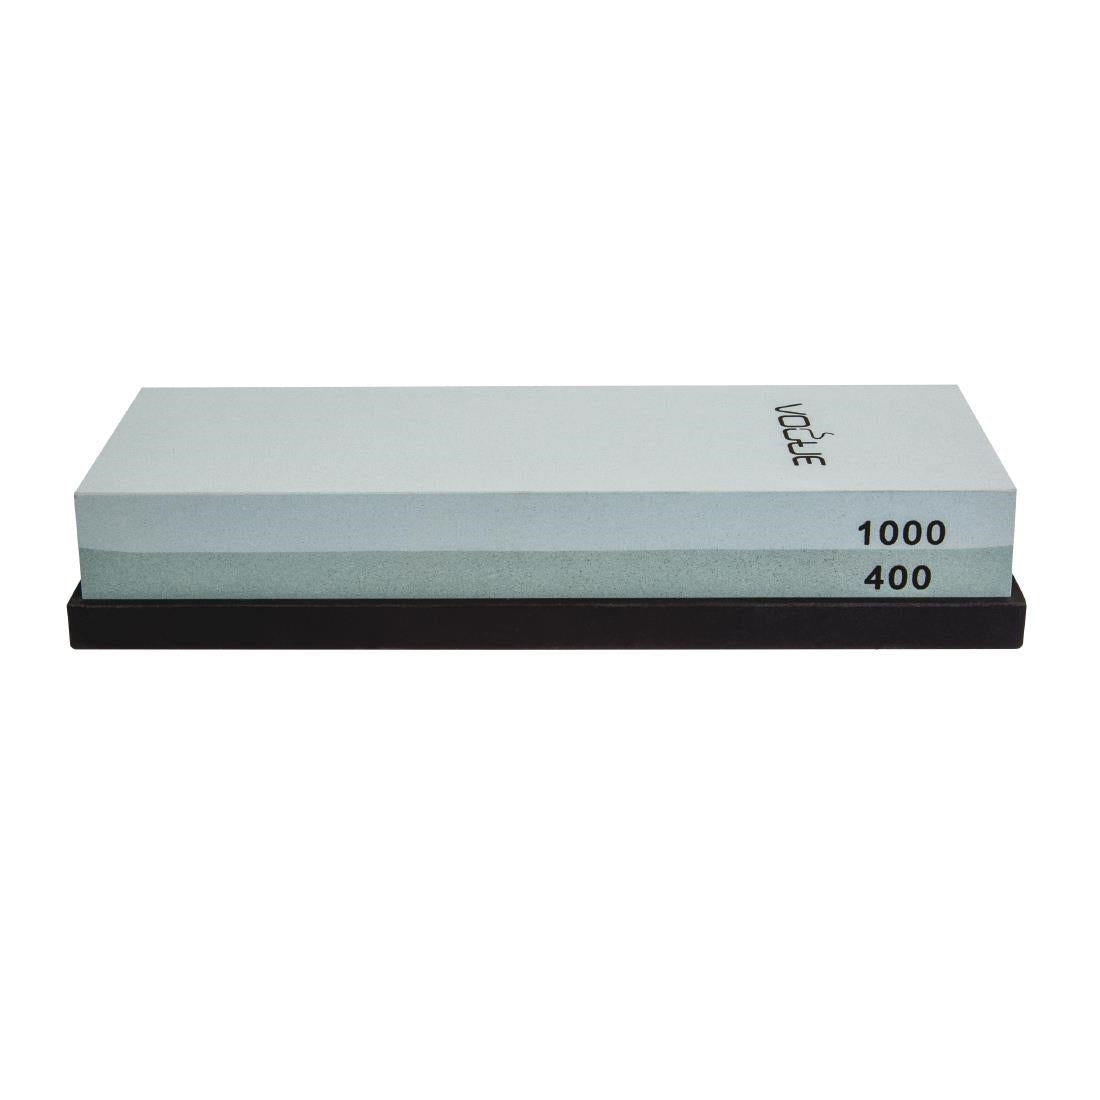 GD036 Vogue Dual Grit Whetstone 400-1000 JD Catering Equipment Solutions Ltd